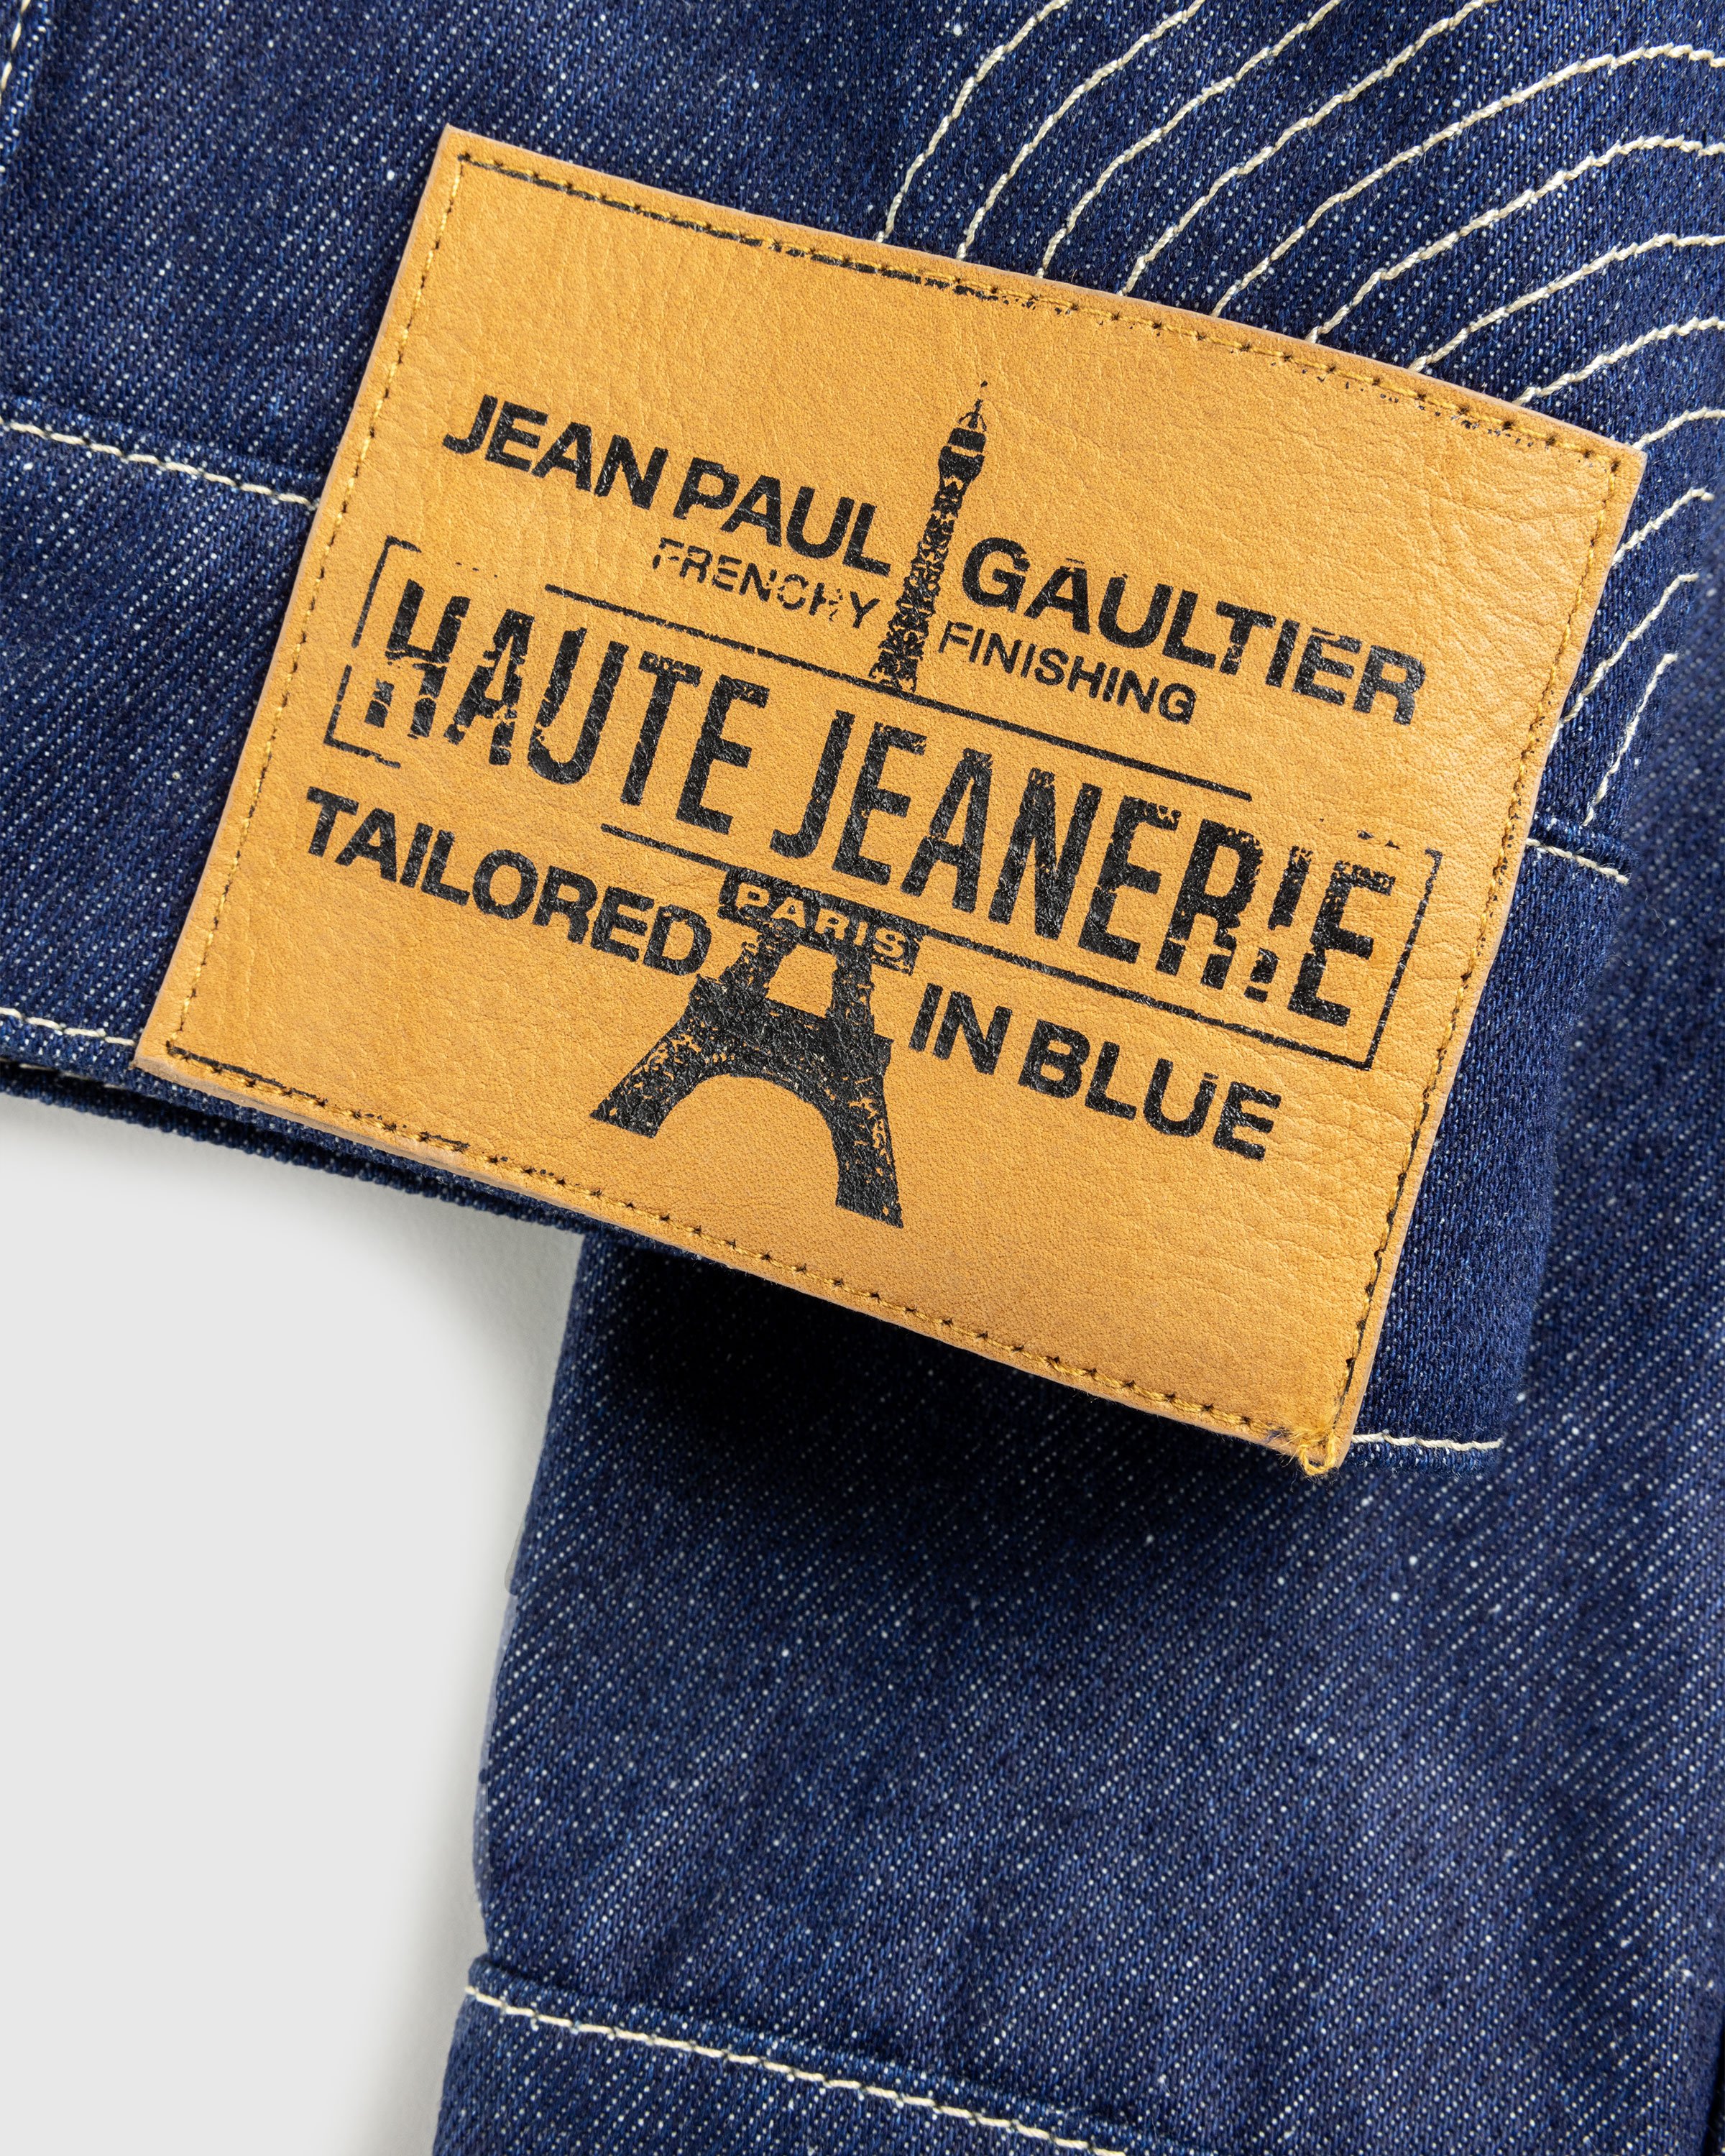 Jean Paul Gaultier - Denim Jacket With Contrasted Topstitching Madonna Inspired Indigo/Tabac - Clothing - Multi - Image 4